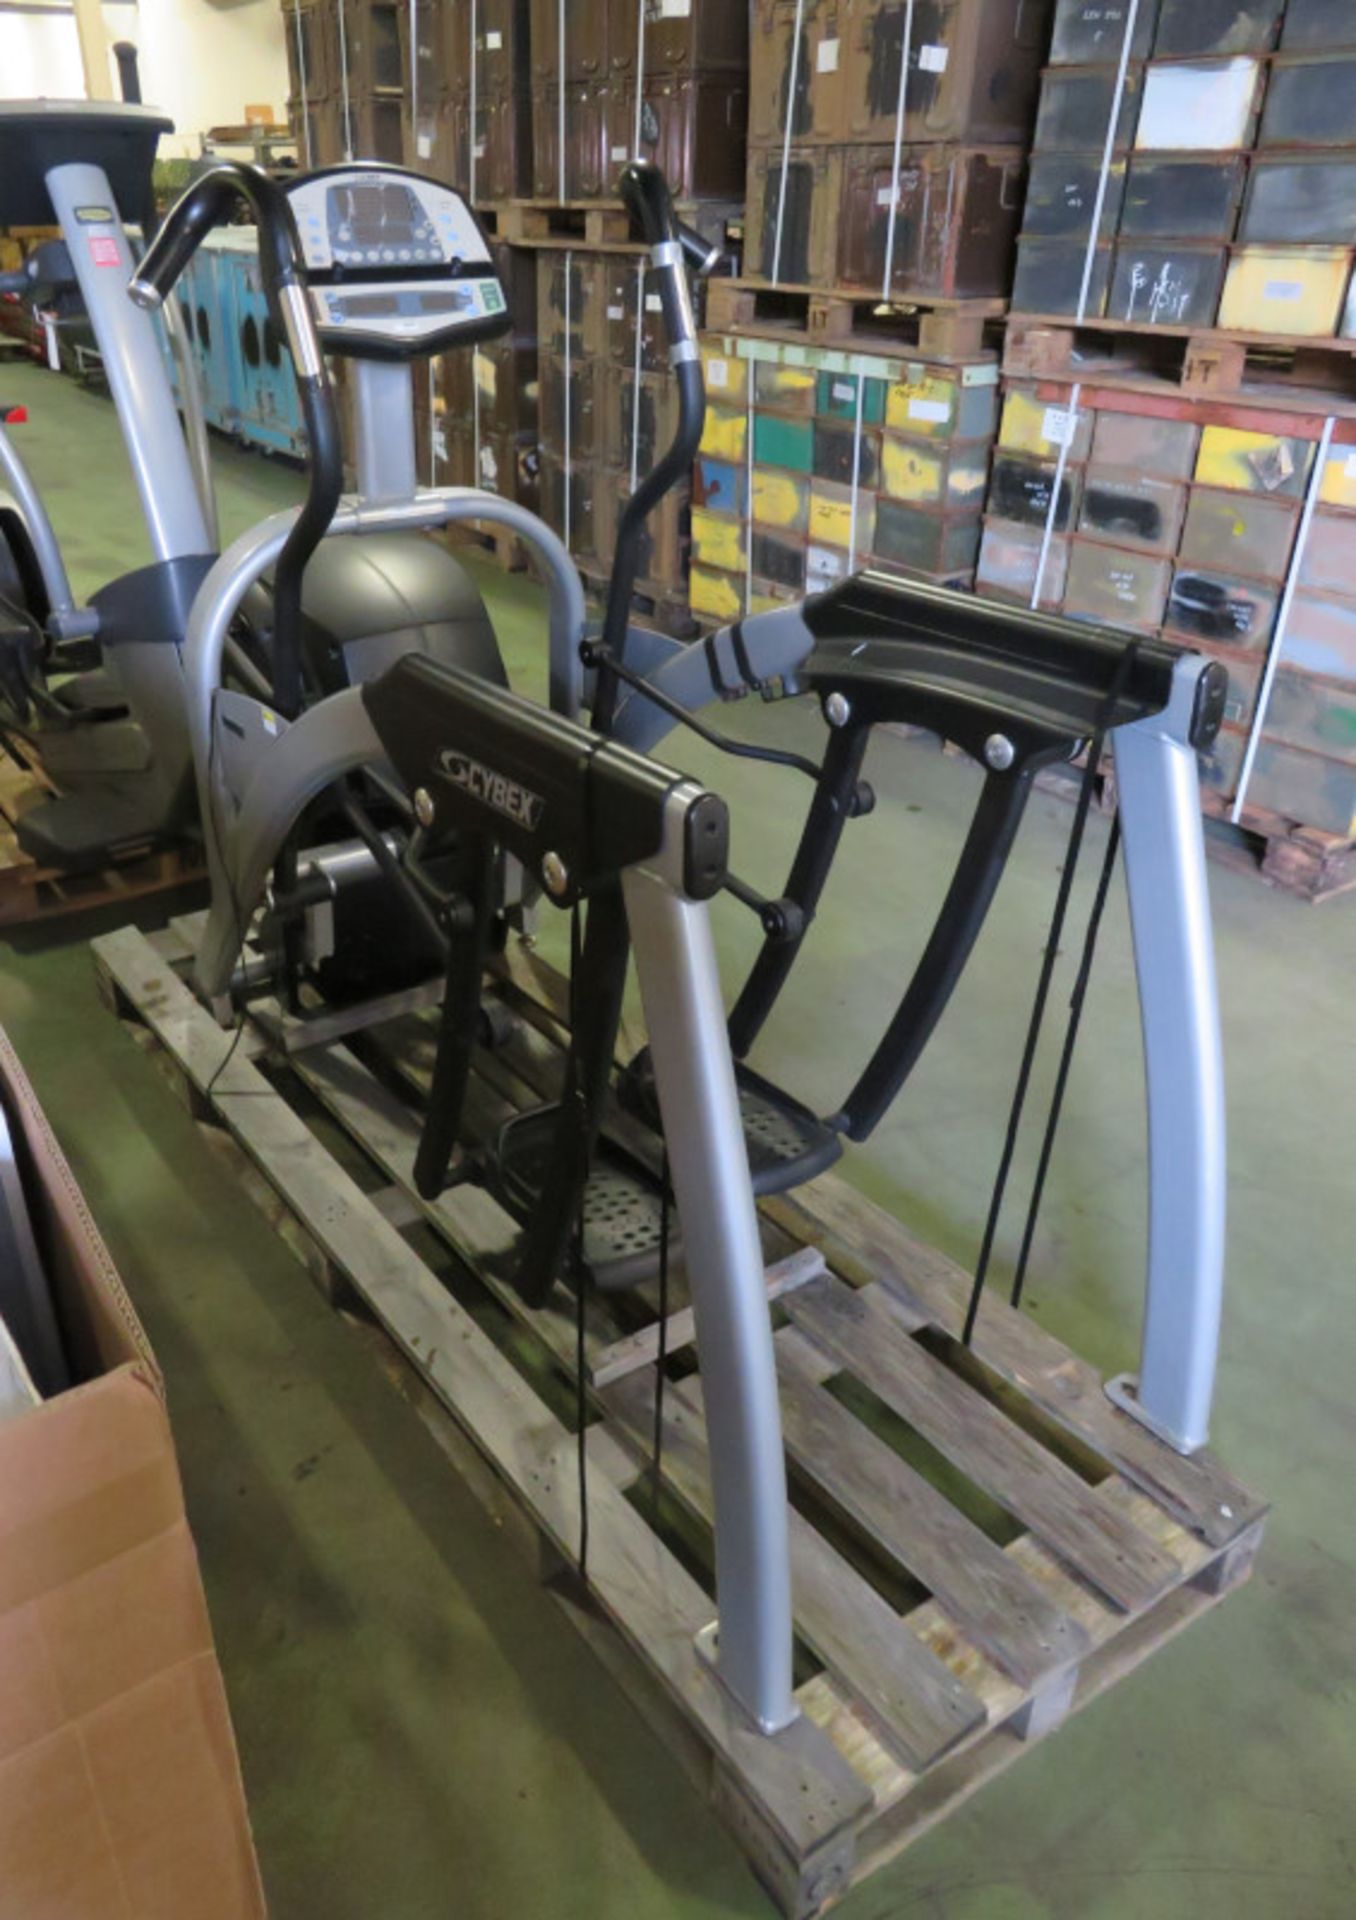 Cybex Arc Trainer cross trainer - model 630A - Image 8 of 8